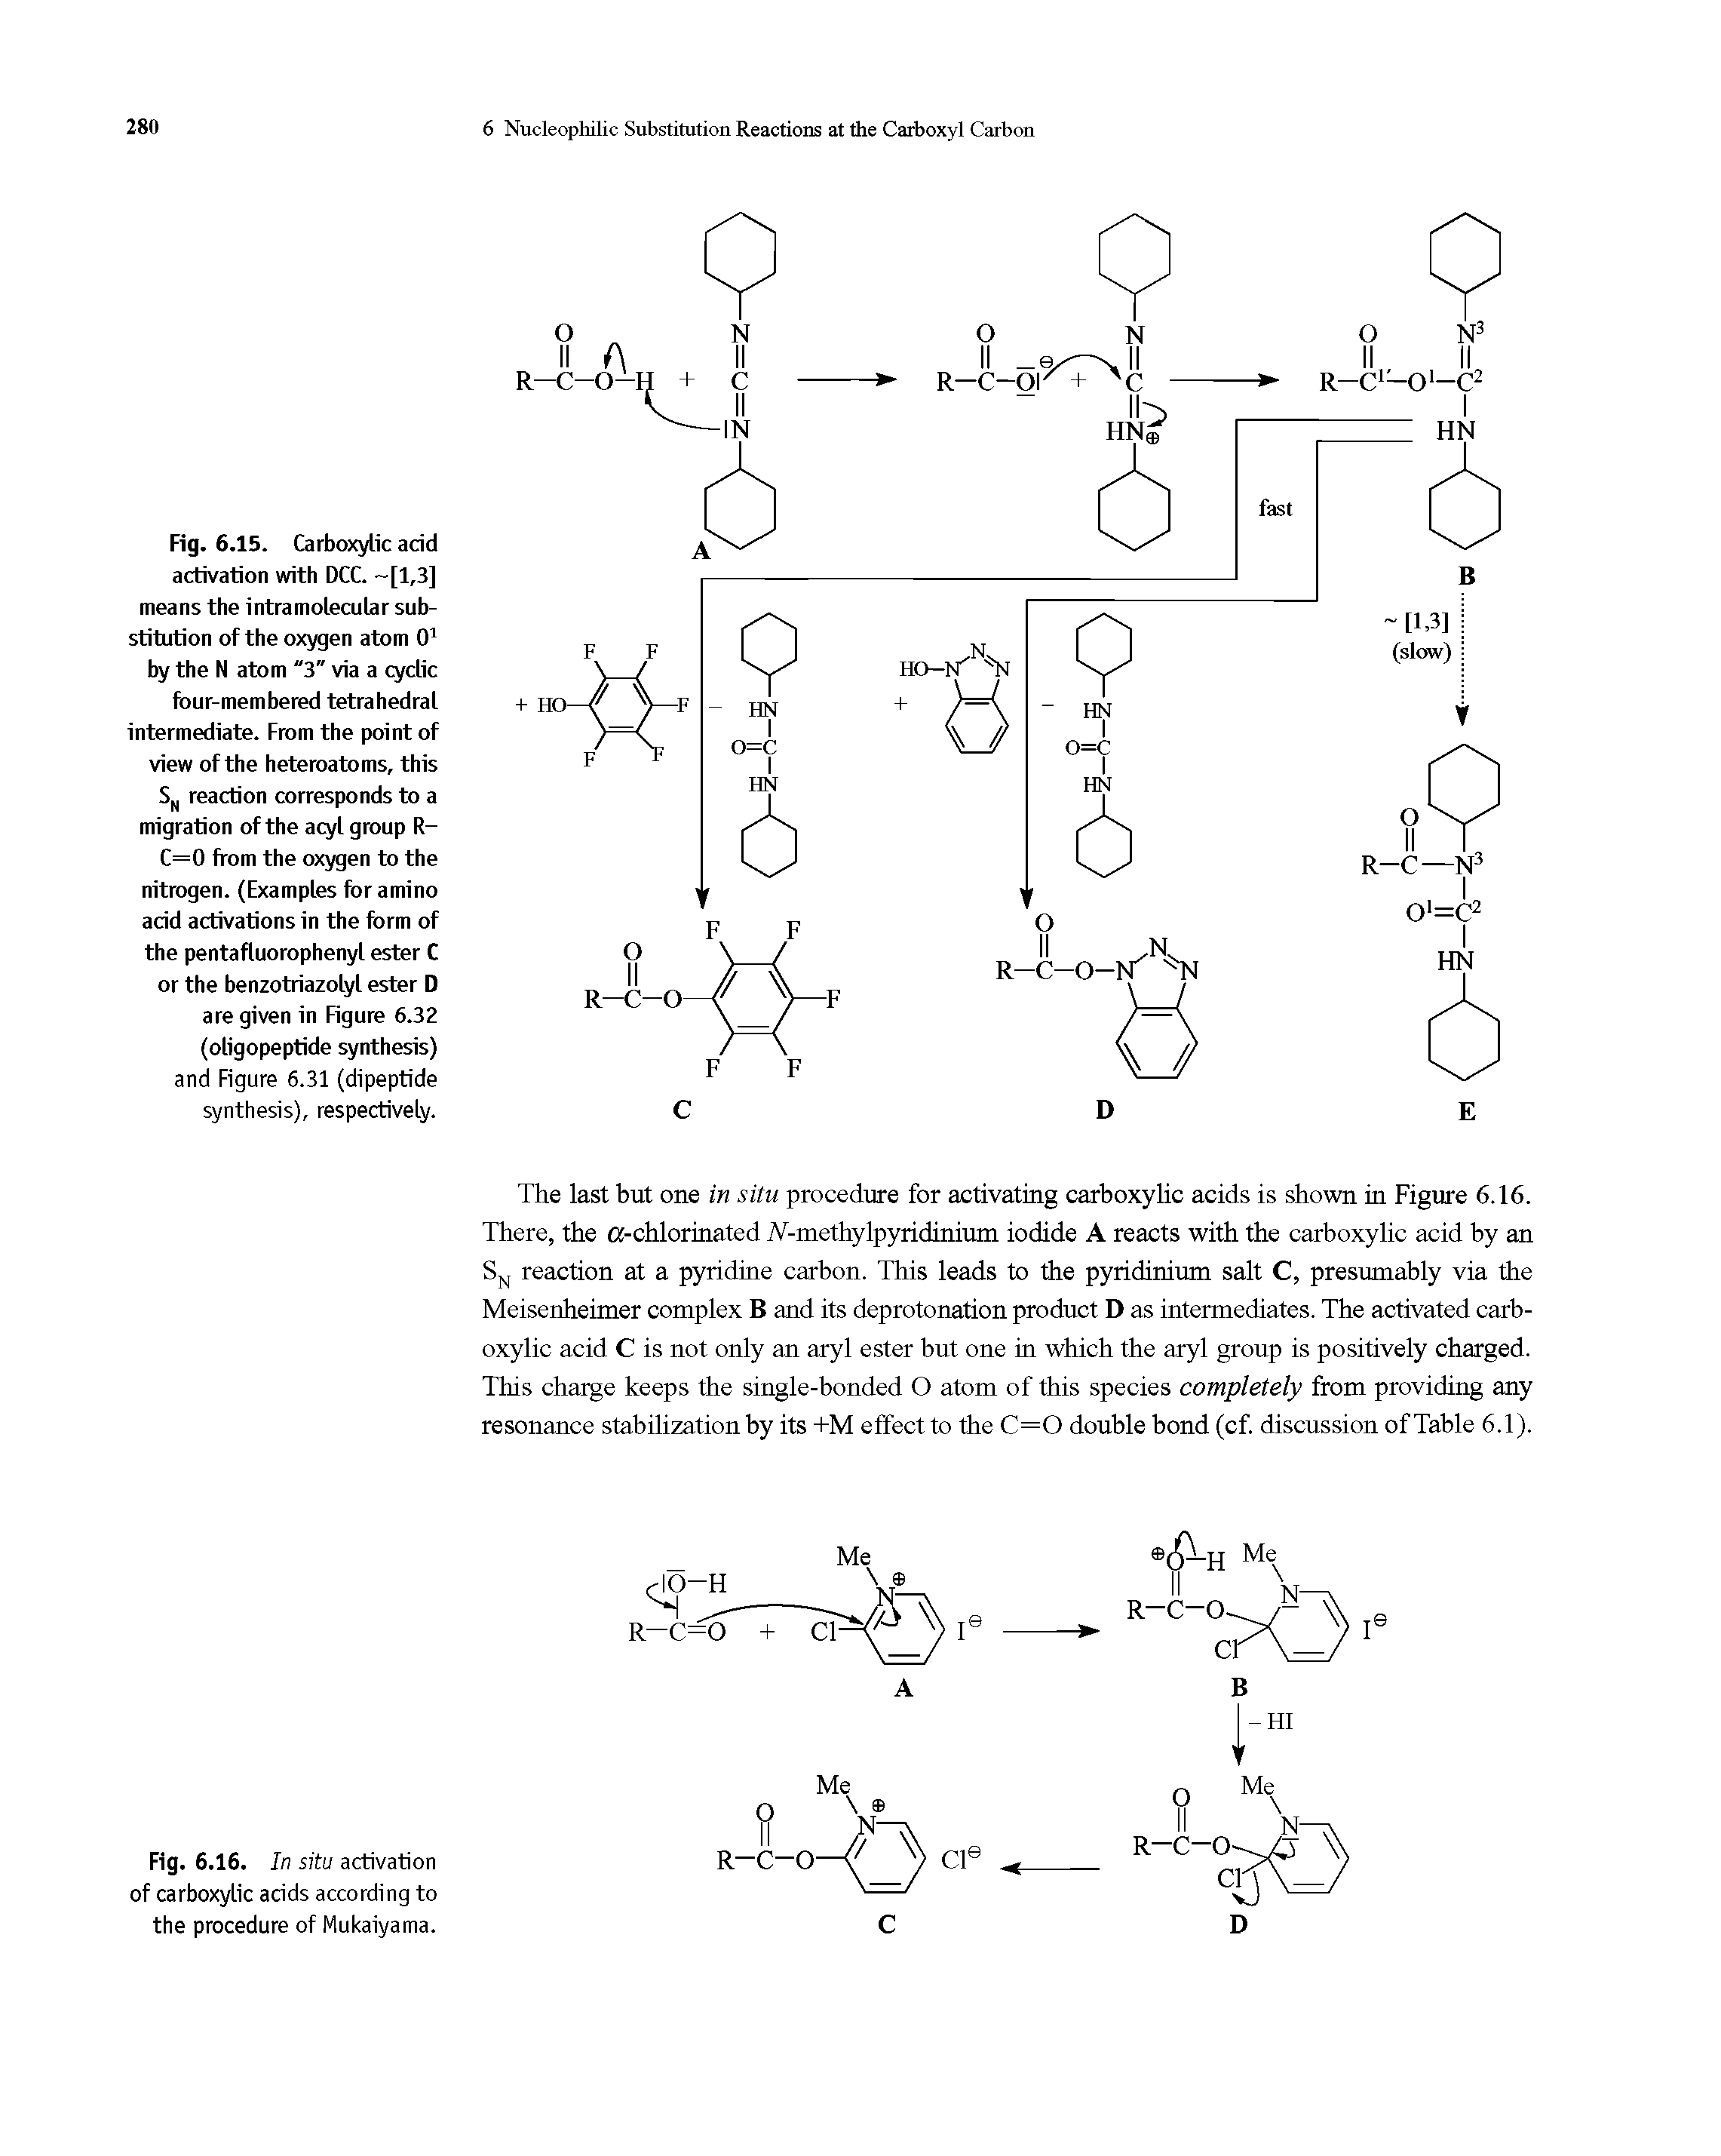 Fig. 6.15. Carboxylic acid activation with DCC. [1,3] means the intramolecular substitution of the oxygen atom 01 by the N atom "3" via a cyclic four-membered tetrahedral intermediate. From the point of view of the heteroatoms, this SN reaction corresponds to a migration of the acyl group R-C=0 from the oxygen to the nitrogen. (Examples for amino acid activations in the form of the pentafluorophenyl ester C or the benzotriazolyl ester D are given in Figure 6.32 (oligopeptide synthesis) and Figure 6.31 (dipeptide synthesis), respectively.